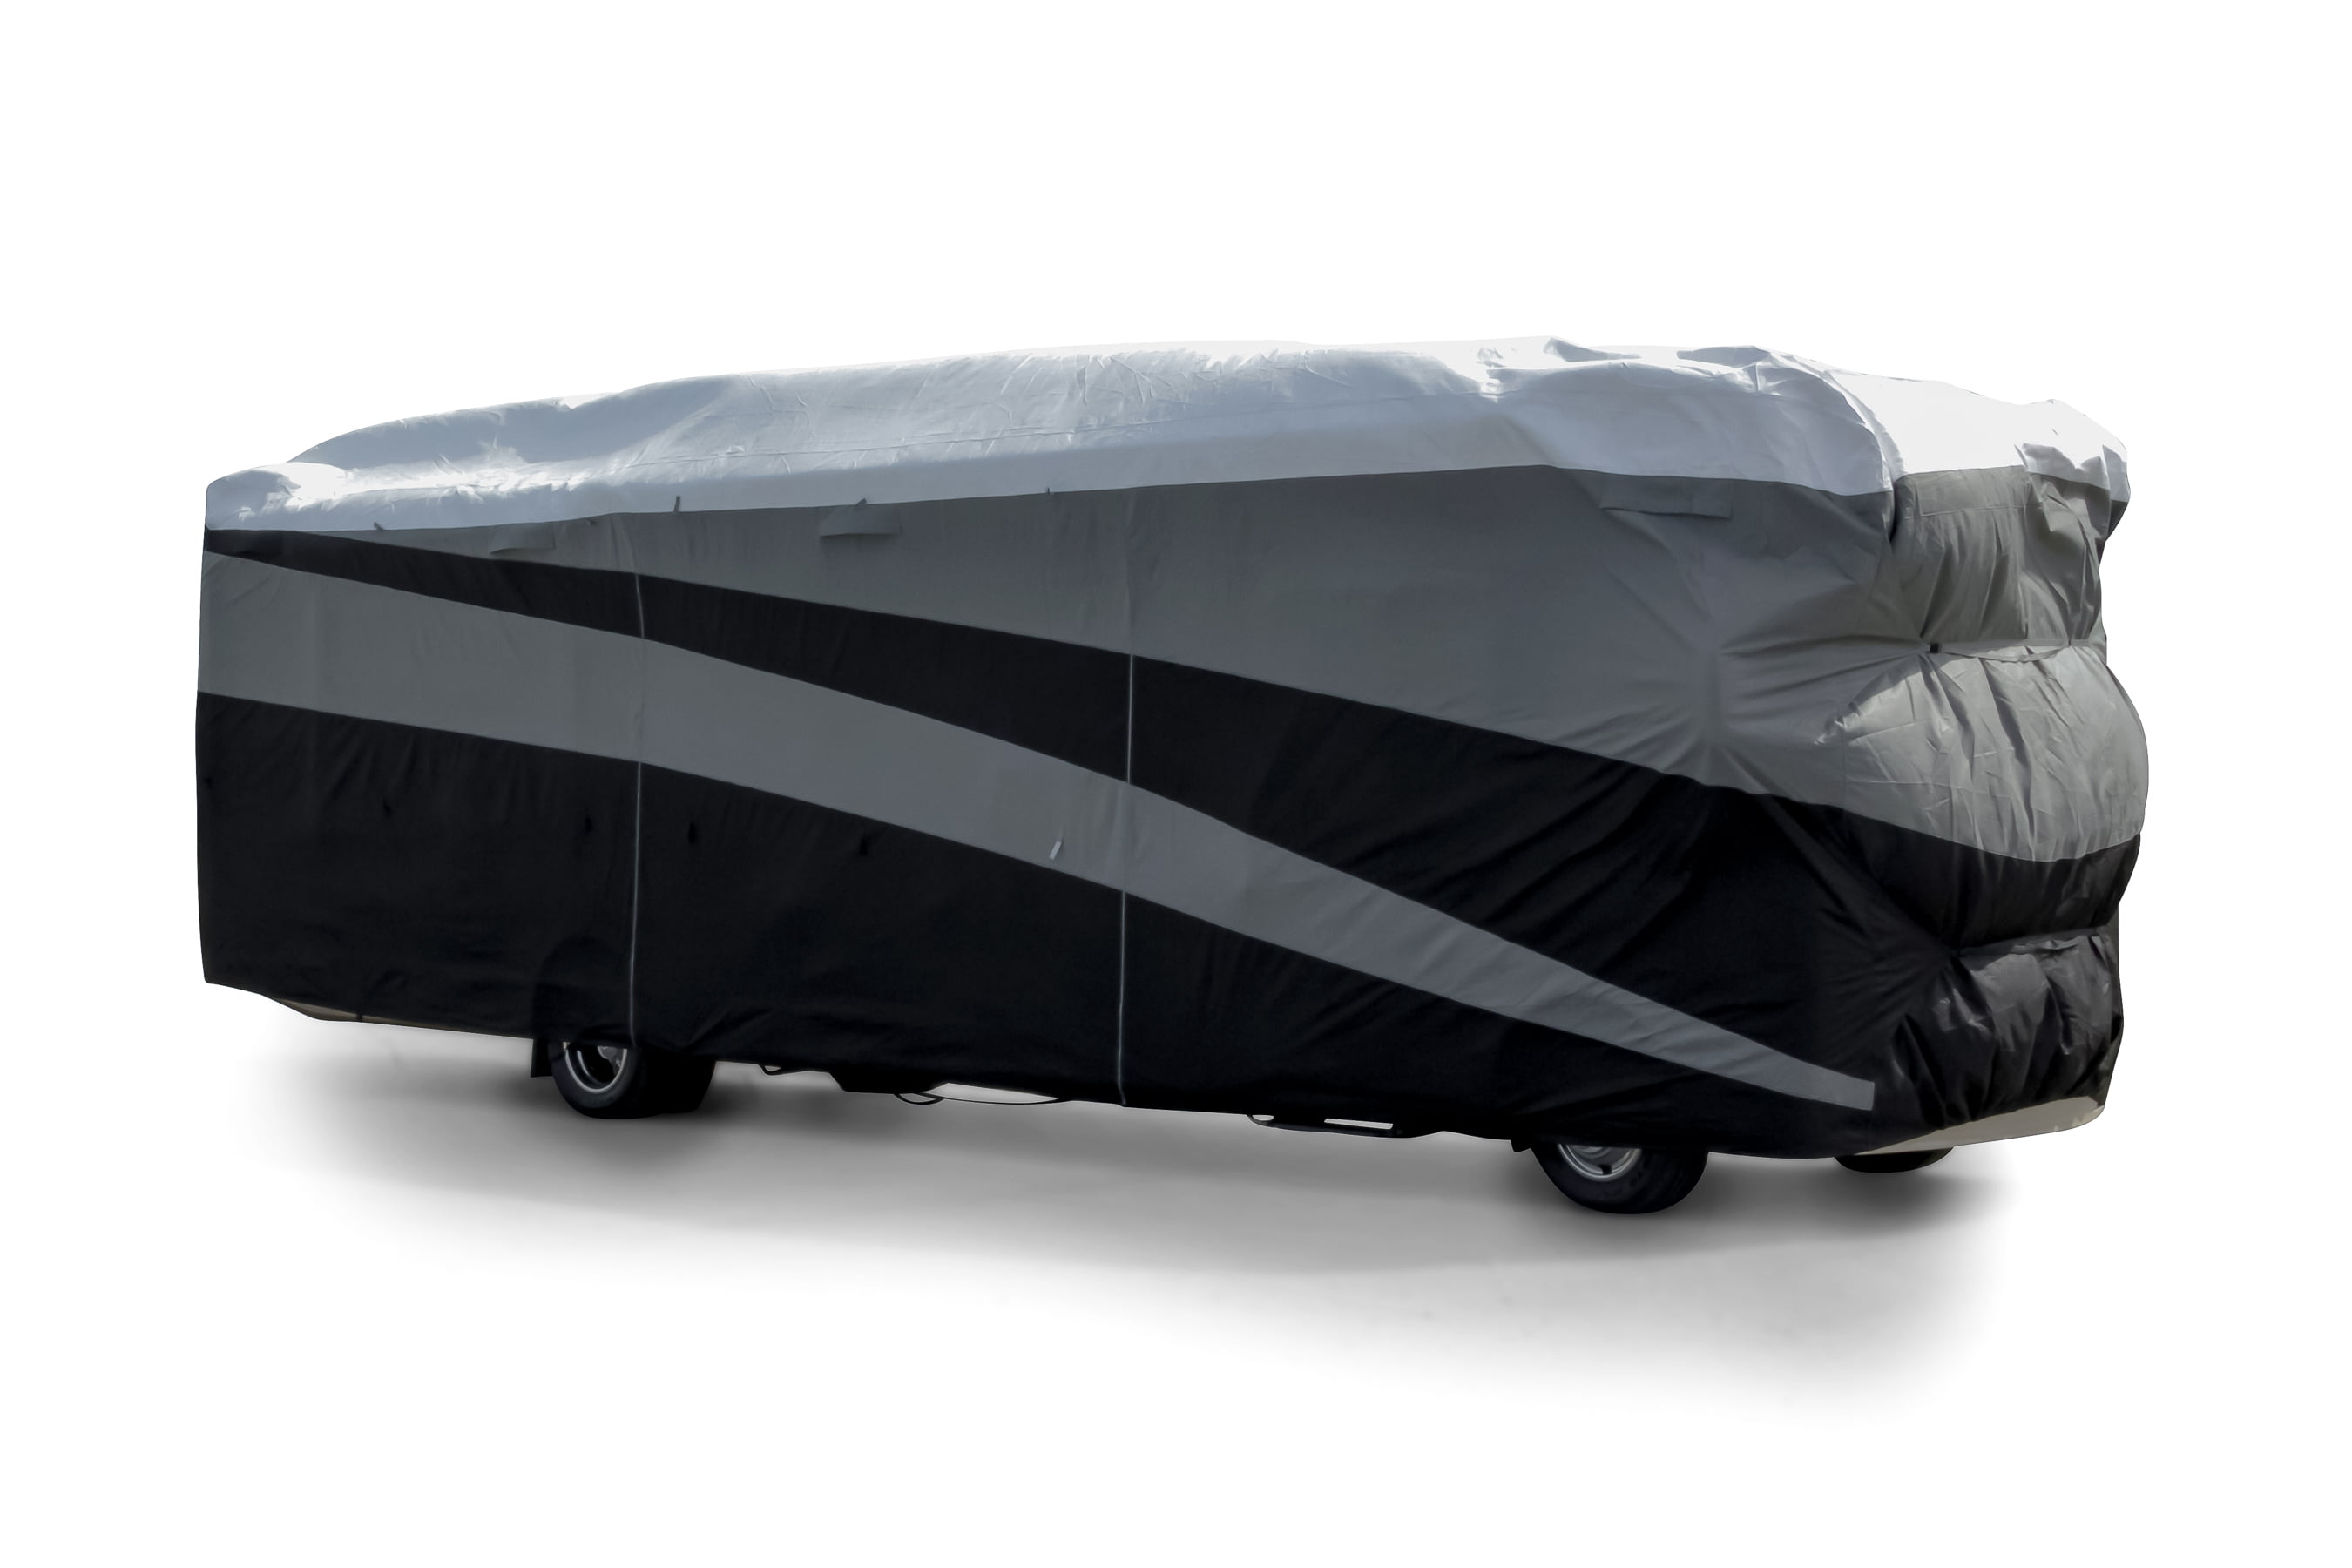 Camco ULTRAGuard Supreme RV Cover Extremely Durable Design 56102 Weatherproof with a Dupont Tyvek Top | Fits Class A RVs 28 to 31-Feet 